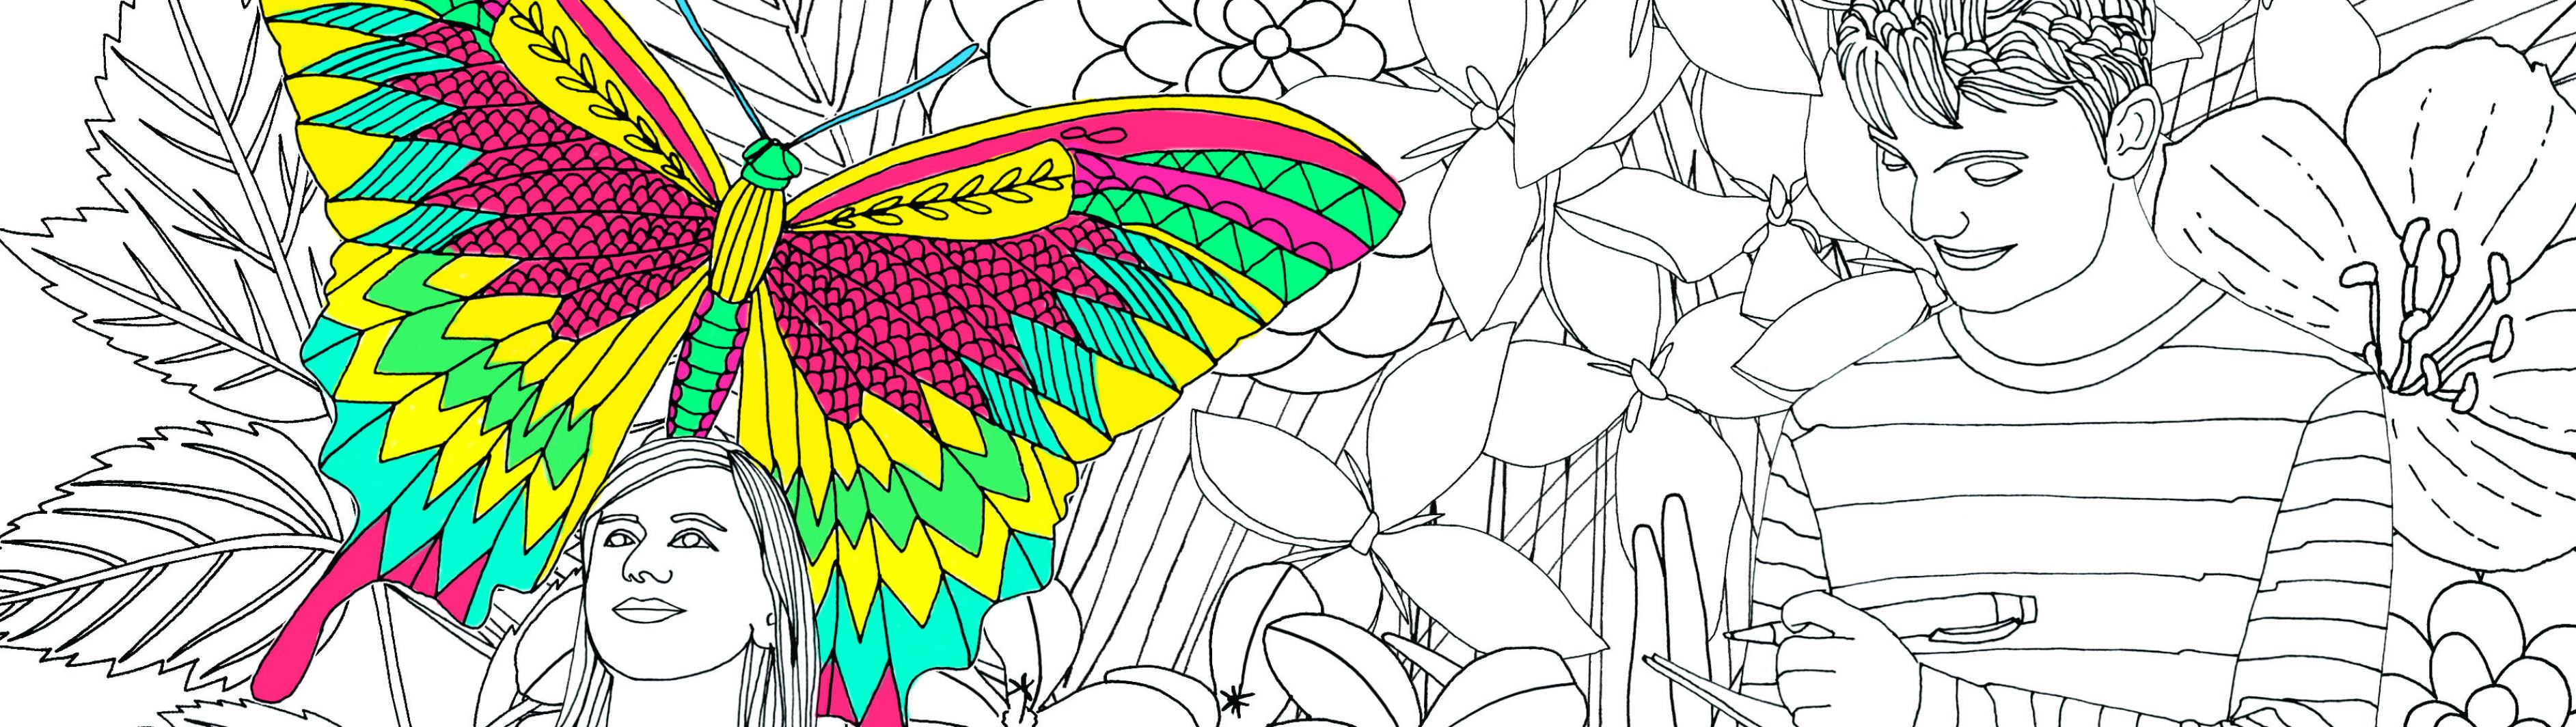 The Coloring Book All About Paper | Paper & Packaging